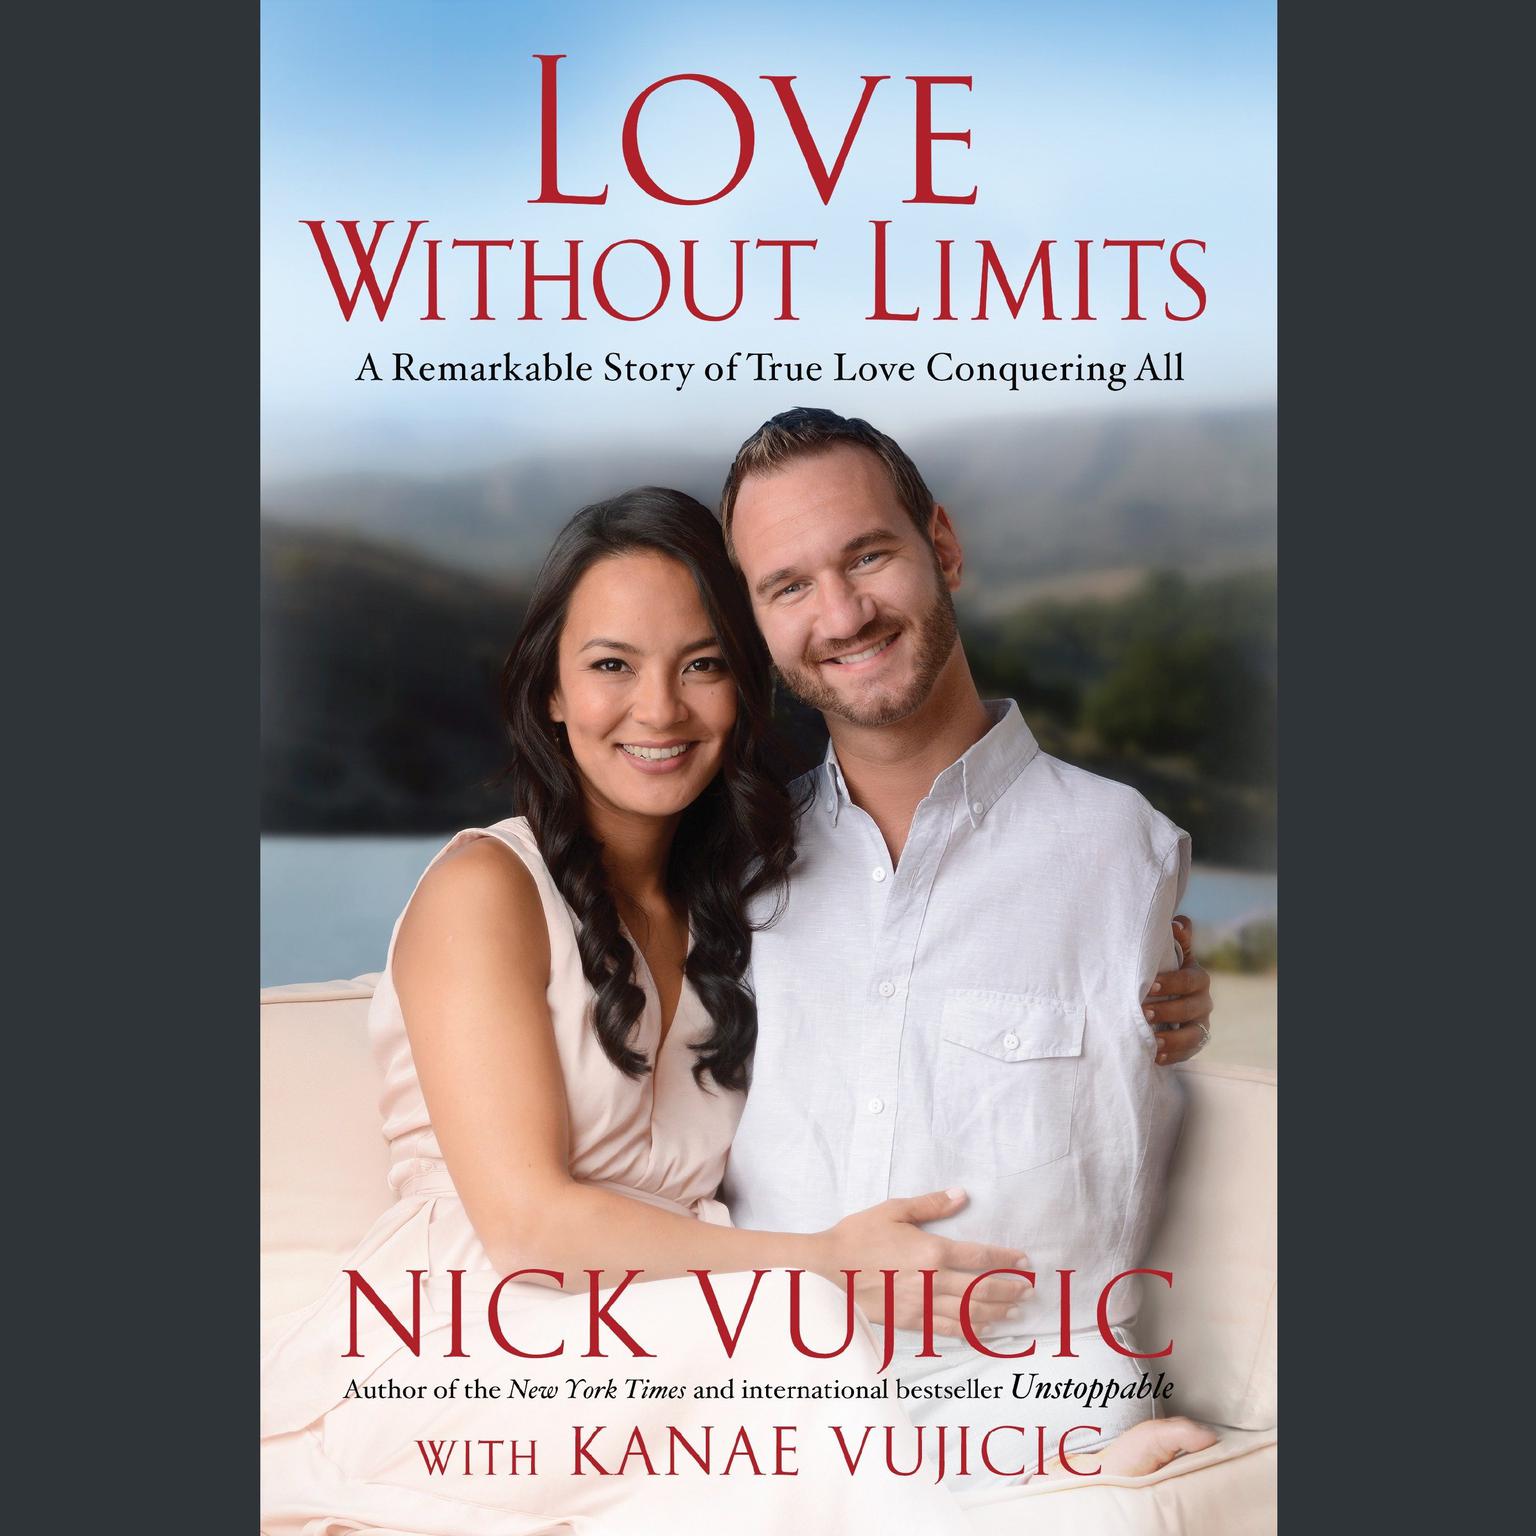 Love Without Limits: A Remarkable Story of True Love Conquering All Audiobook, by Nick Vujicic